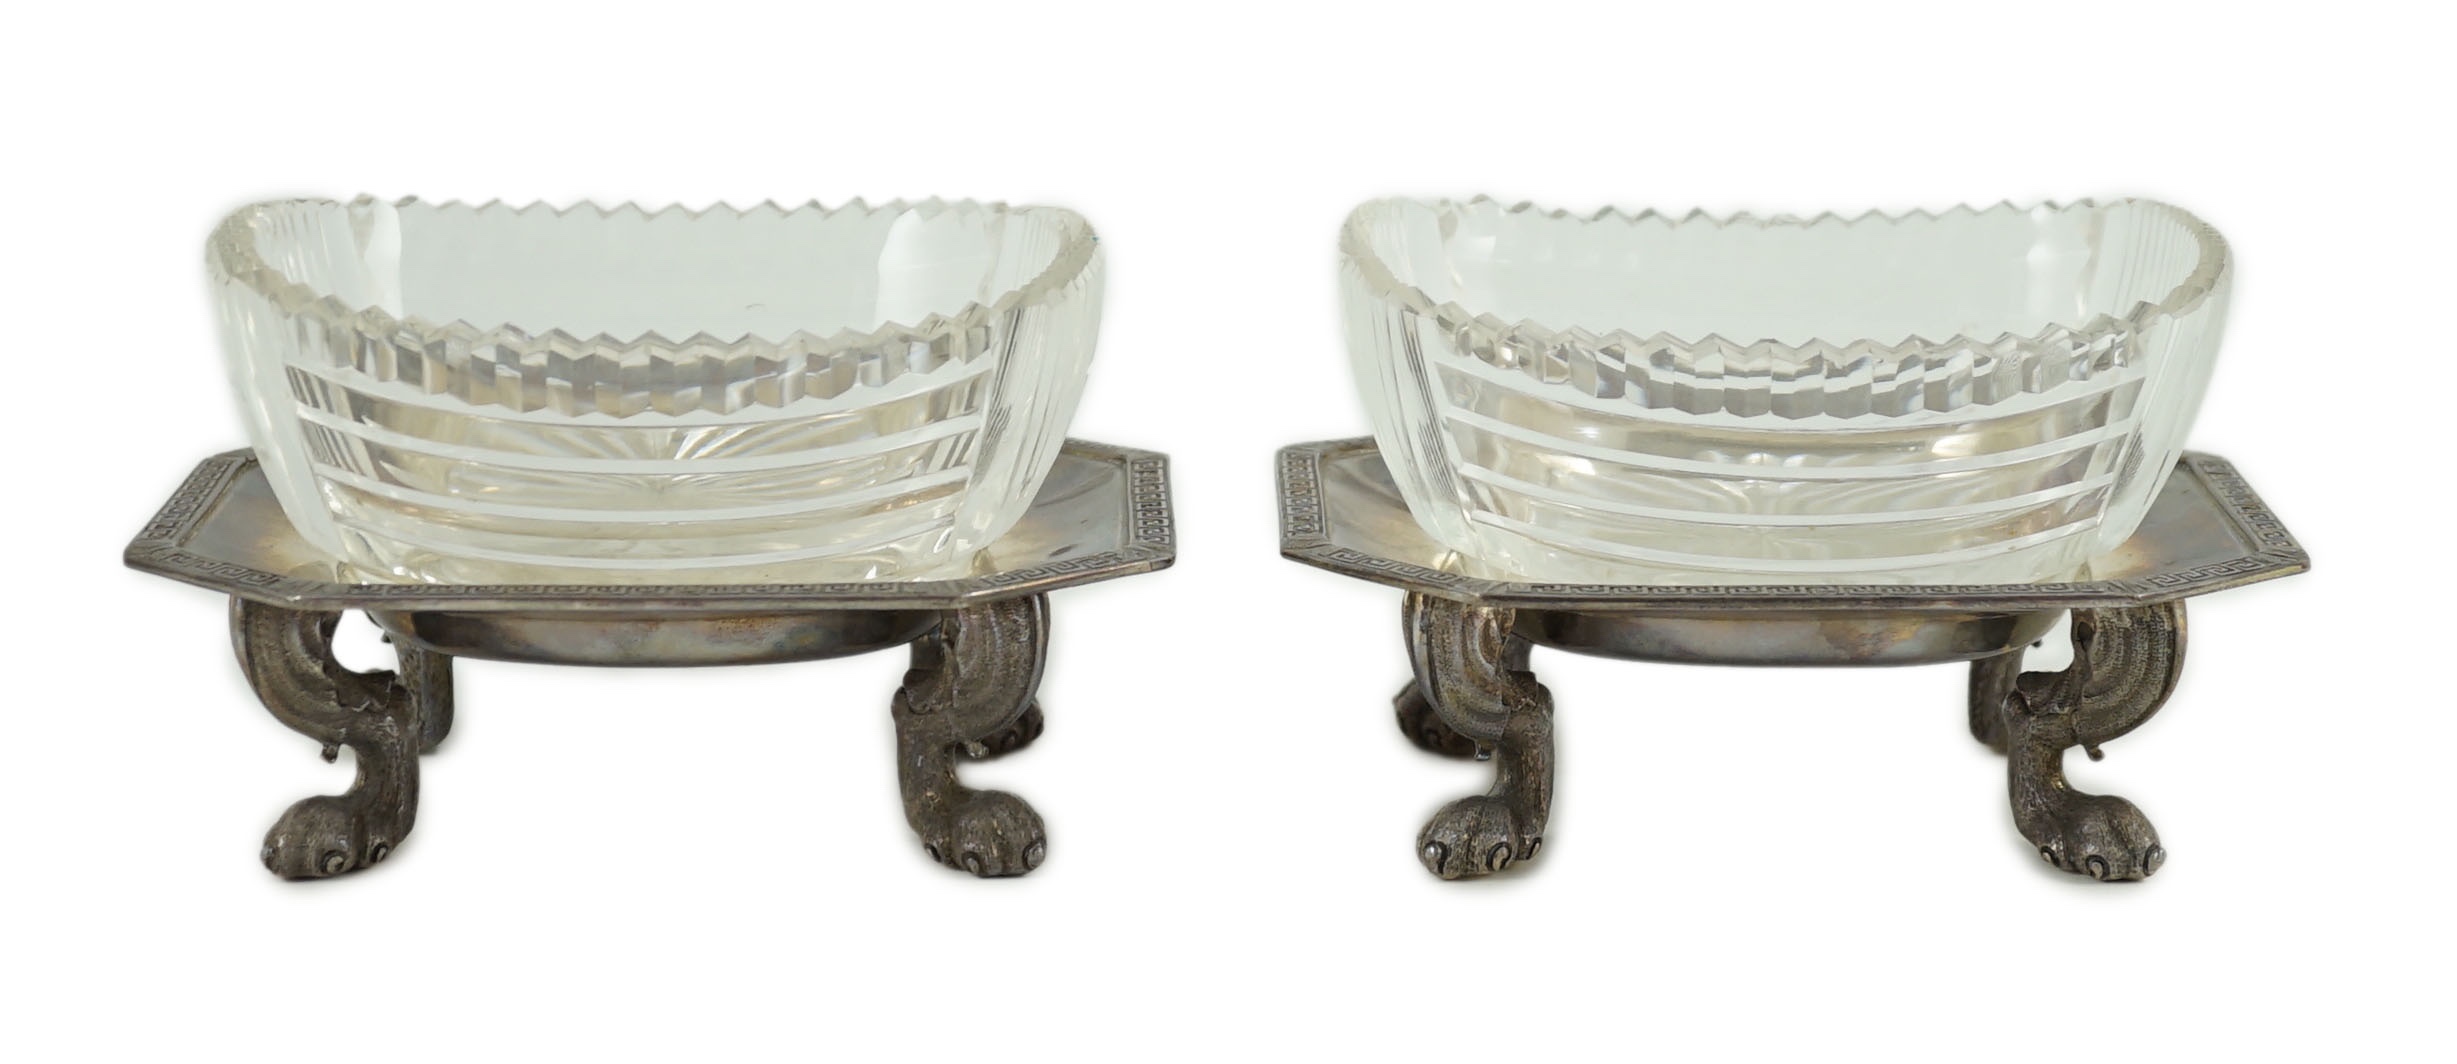 A pair of George V silver salt cellars, with cut glass liners